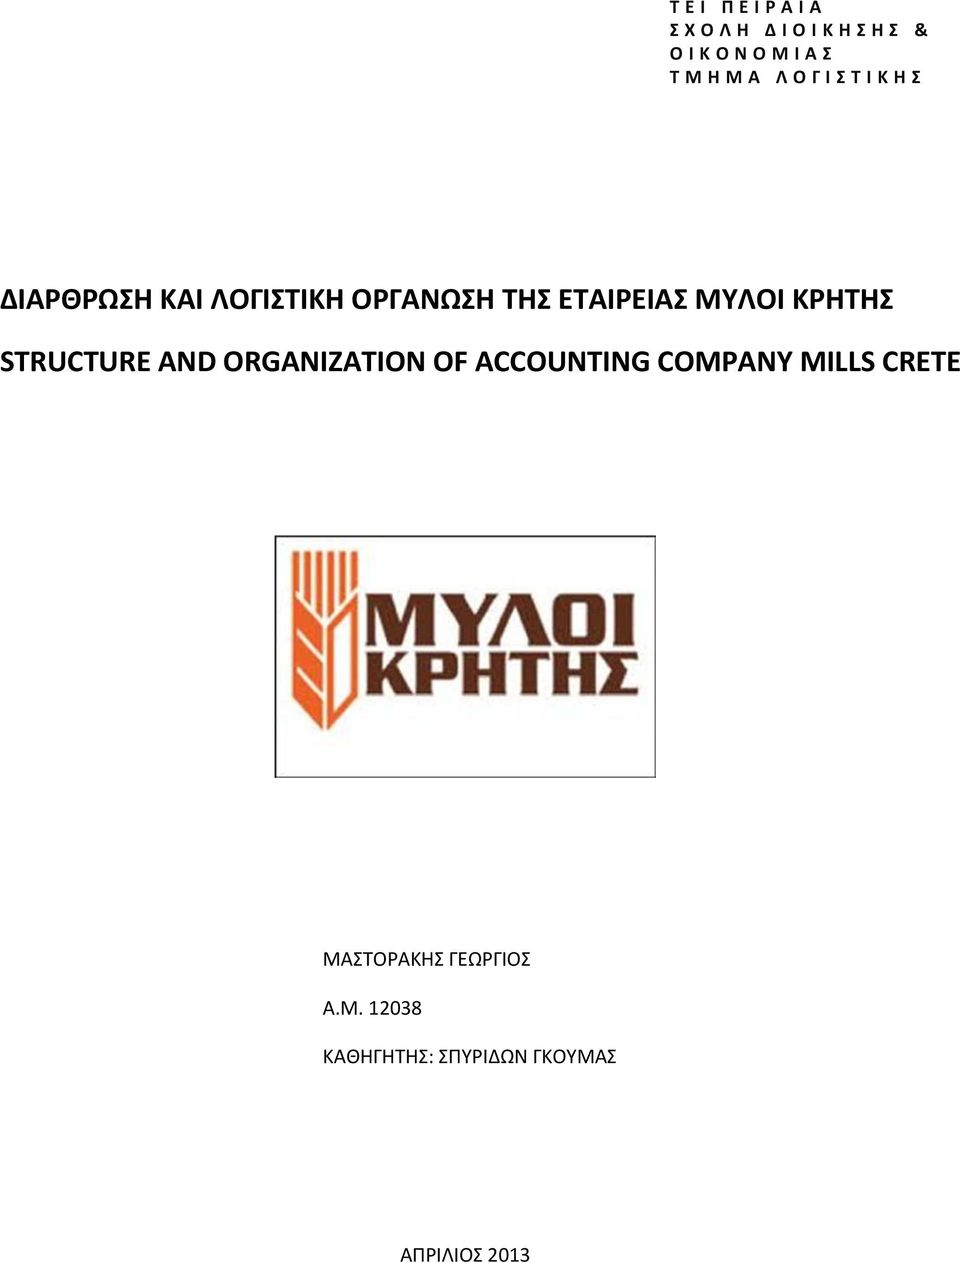 STRUCTURE AND ORGANIZATION OF ACCOUNTING COMPANY MILLS CRETE